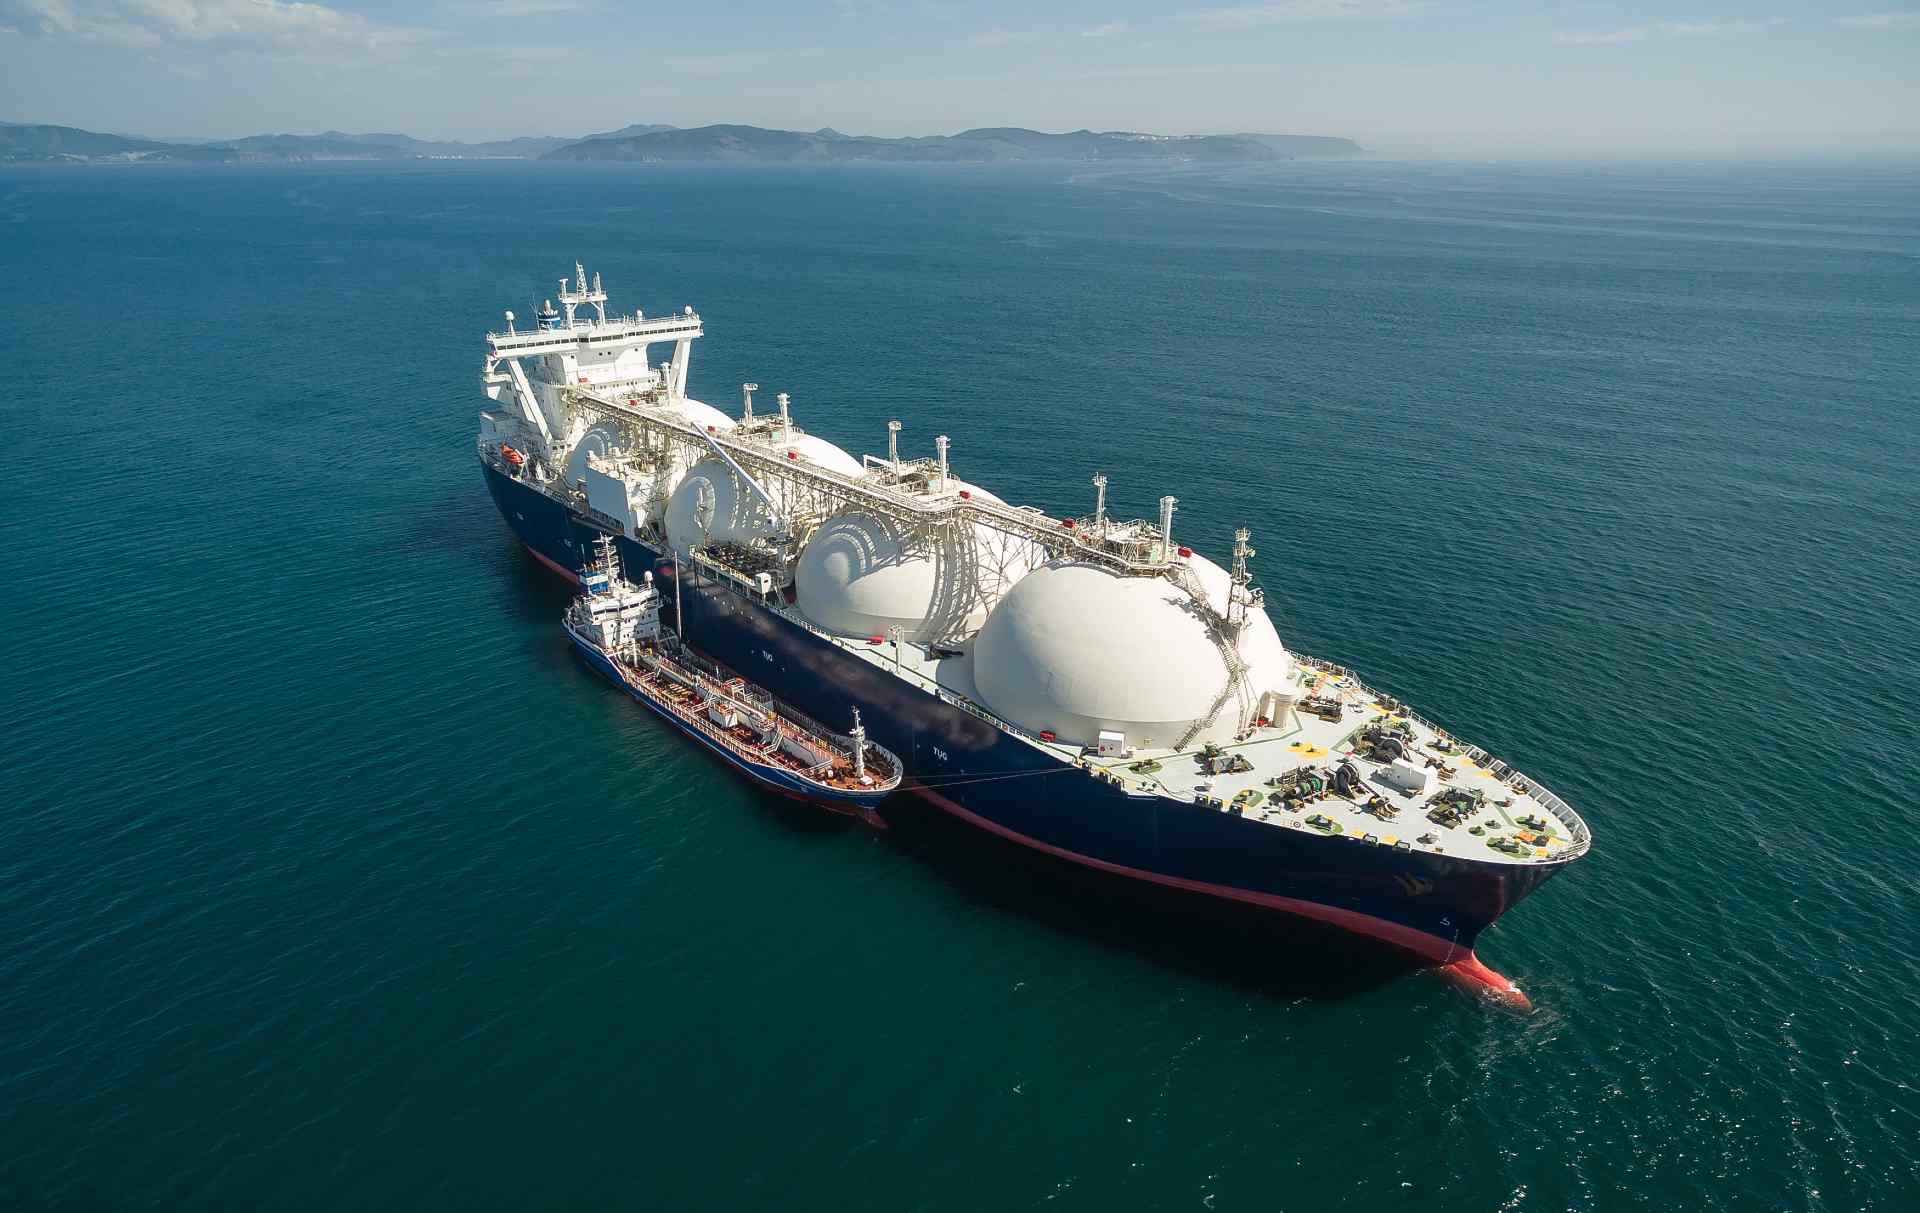 REDUCING EMISSIONS IN THE SHIPPING INDUSTRY THROUGH LNG